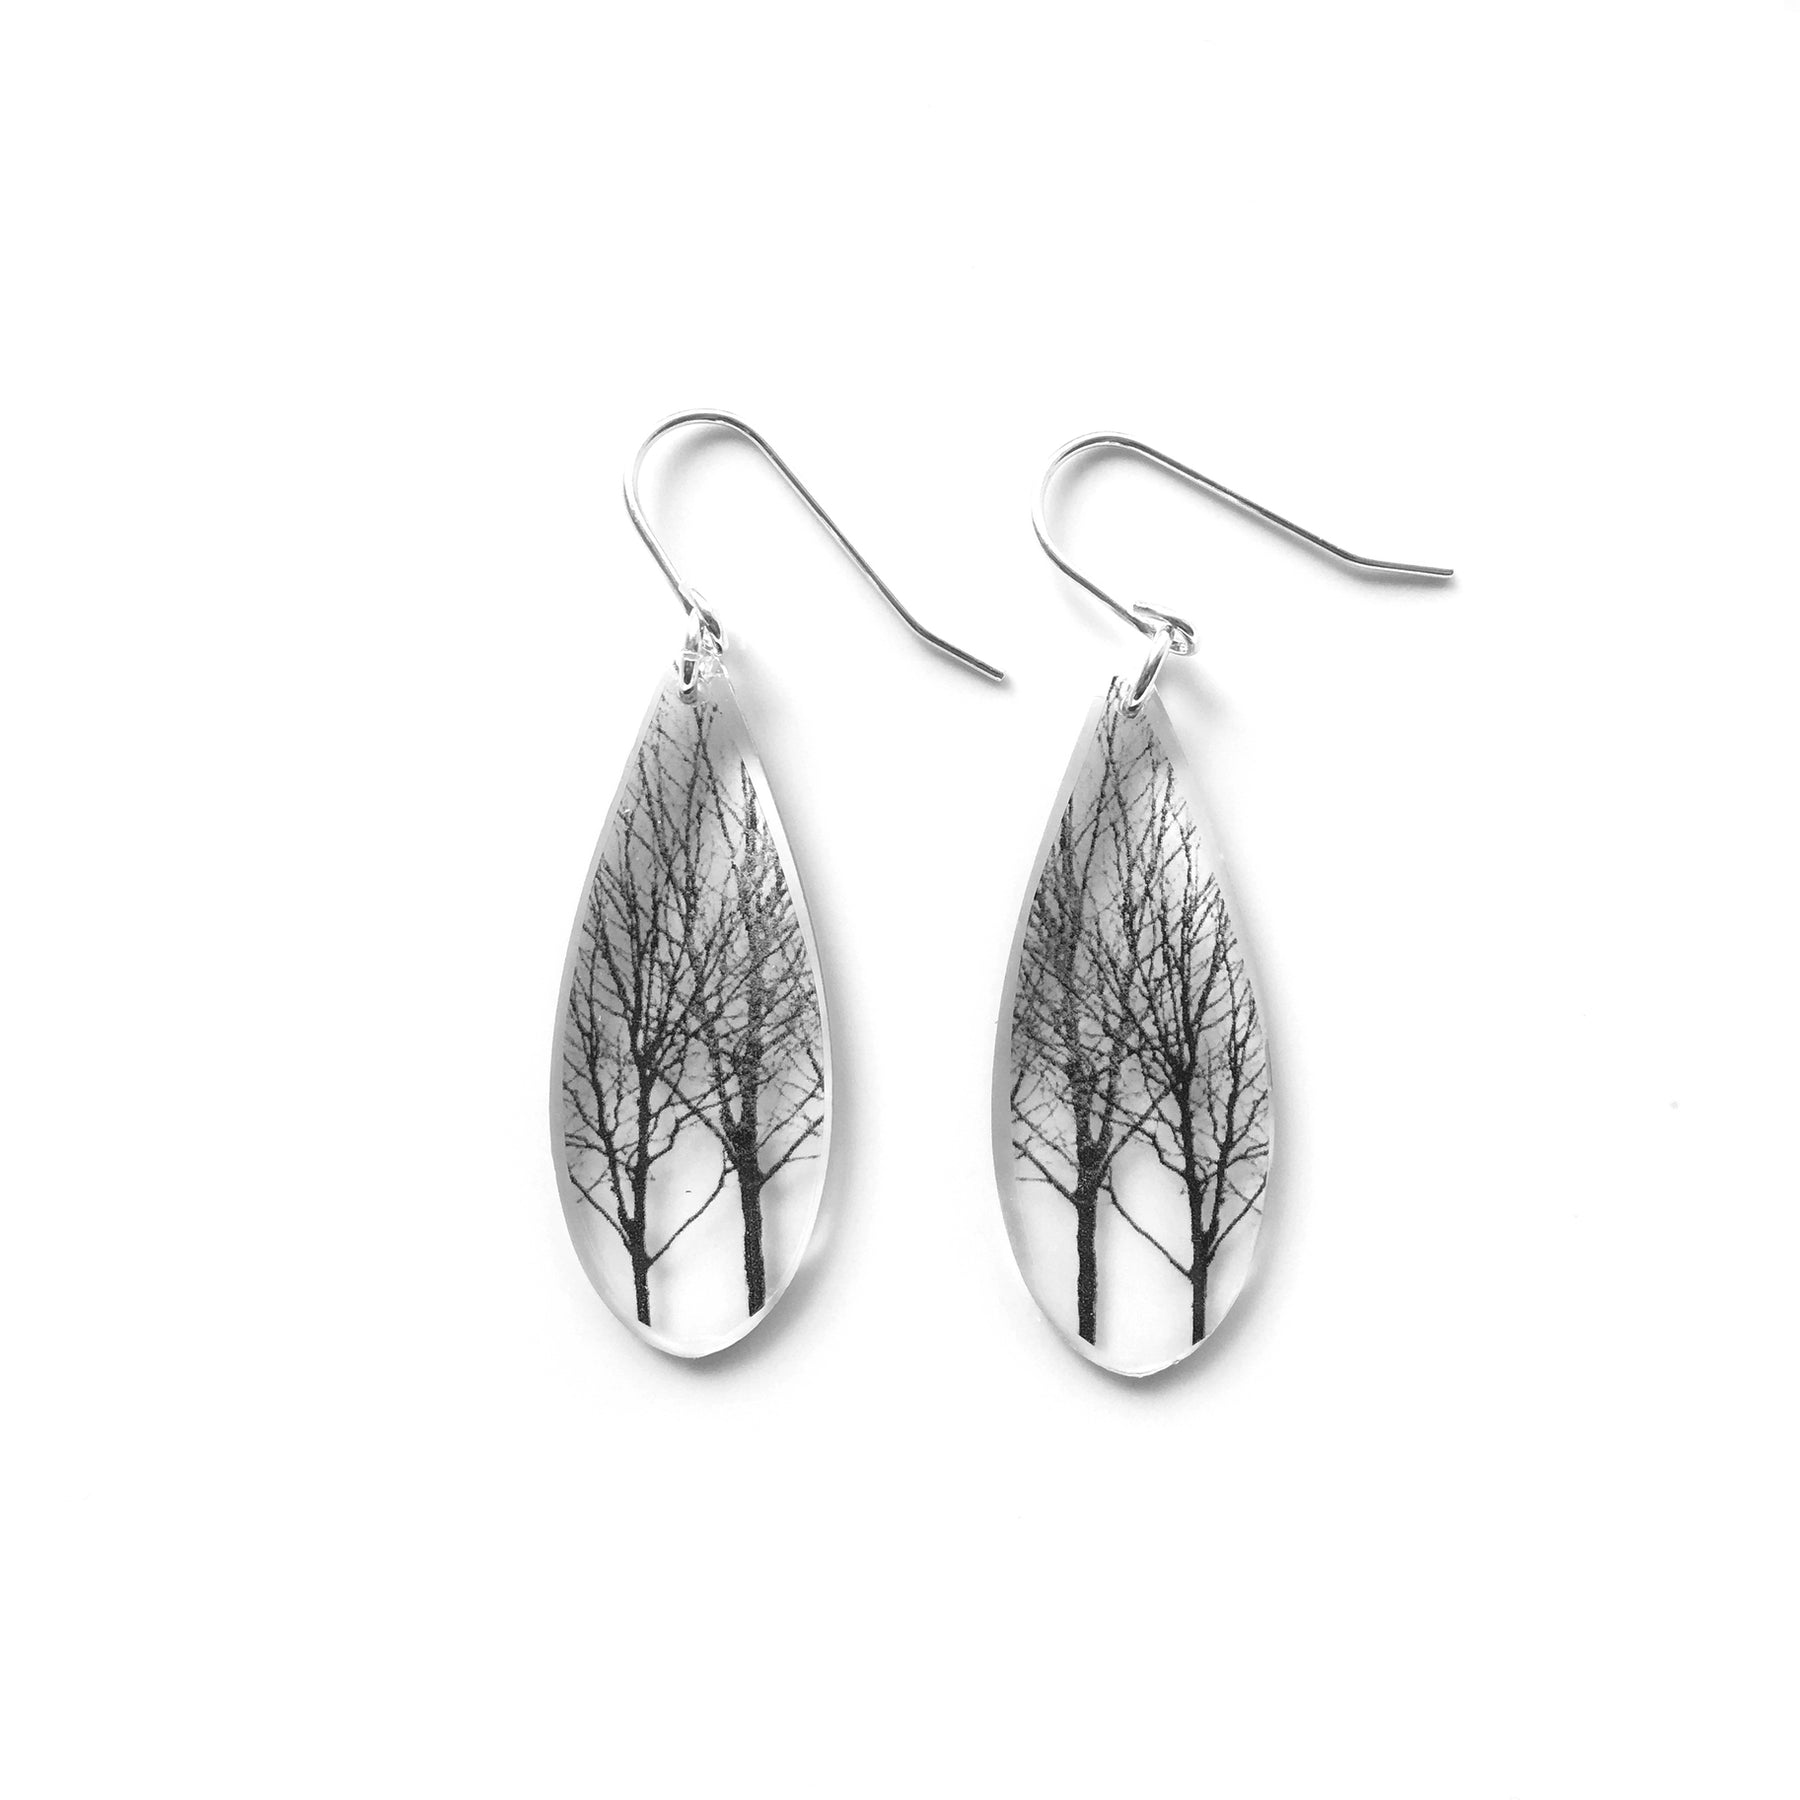 Women's Jewelry, Valentines Day Gift, Wedding Jewelry | DRIP TREES EARRINGS - Minter and Richter Designs